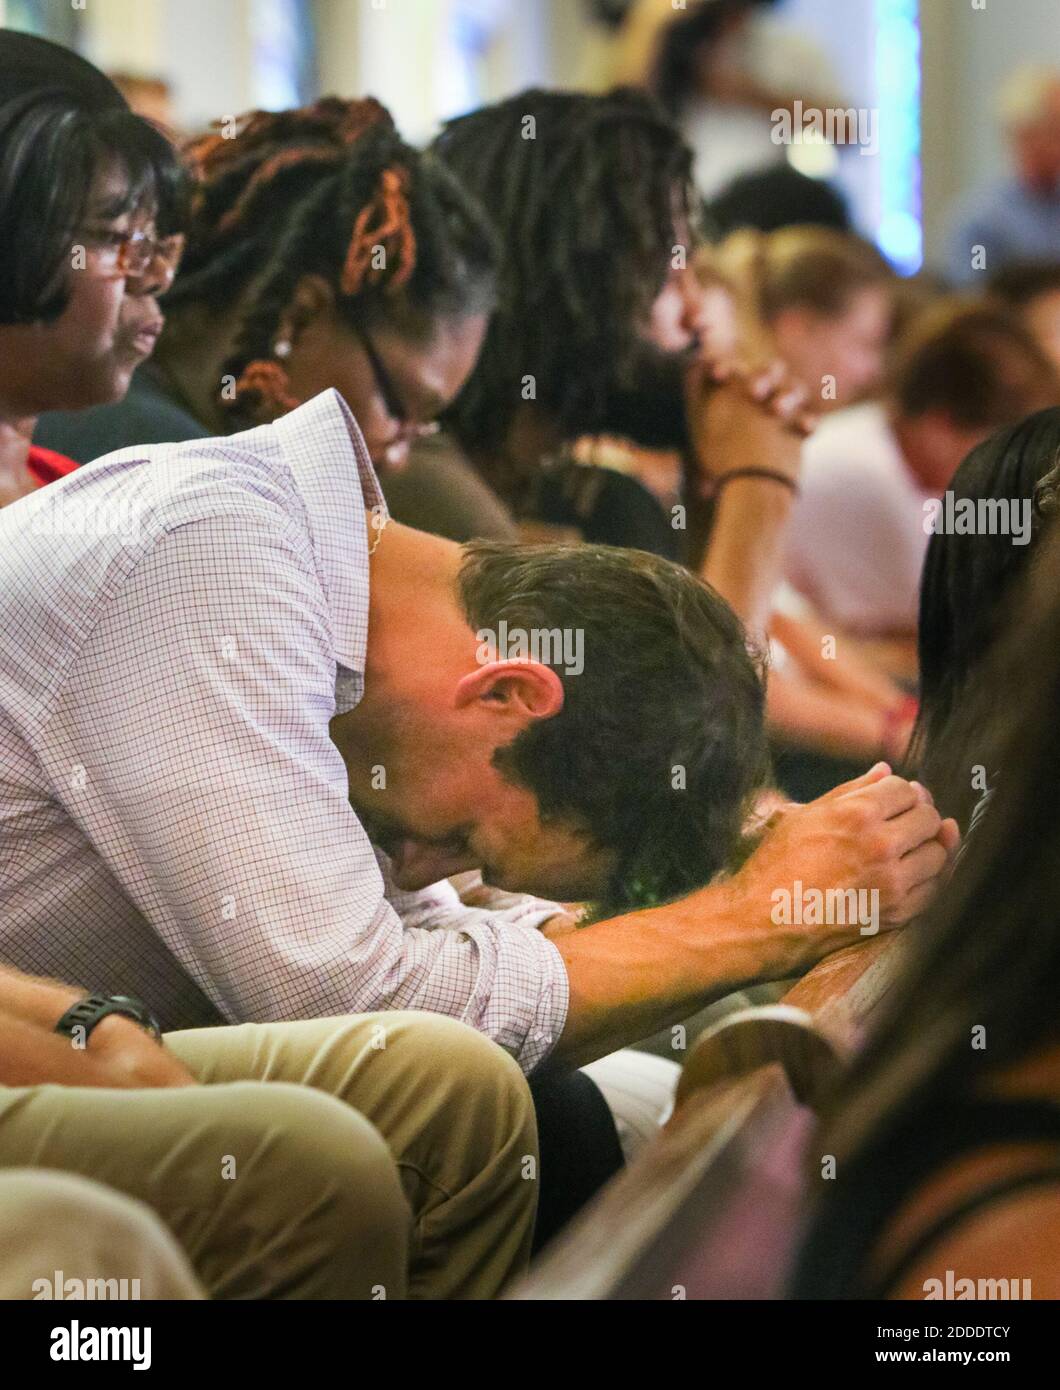 NO FILM, NO VIDEO, NO TV, NO DOCUMENTARY - A vigil is held at Morris Brown AME Church on June 18, 2015 for the nine people who were killed by a gunman in Emanuel AME Church in Charleston, SC, USA. Photo by Tim Dominick/The State/TNS/ABACAPRESS.COM Stock Photo